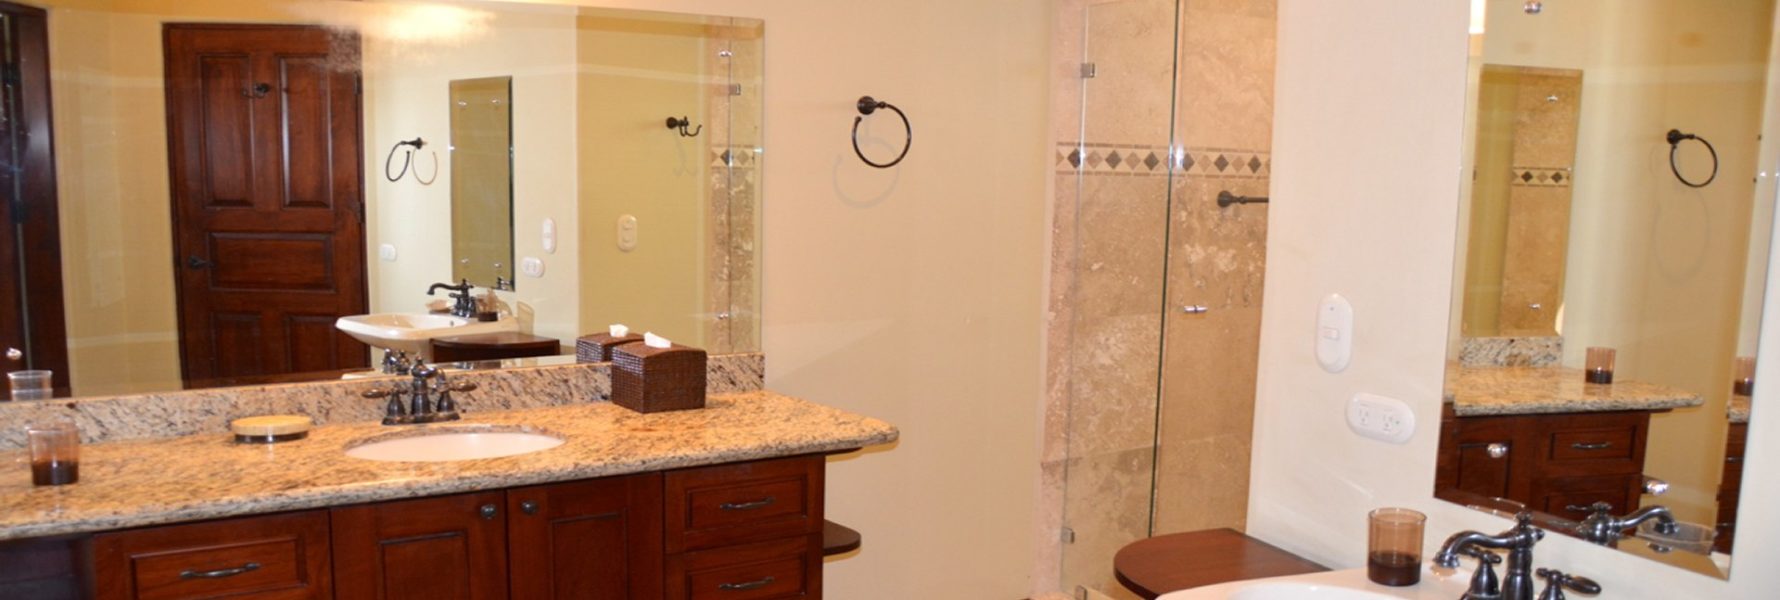 Take an invigorating shower to begin or finish out your day. All the comforts can be fully taken advantage of while using this majestic bathroom